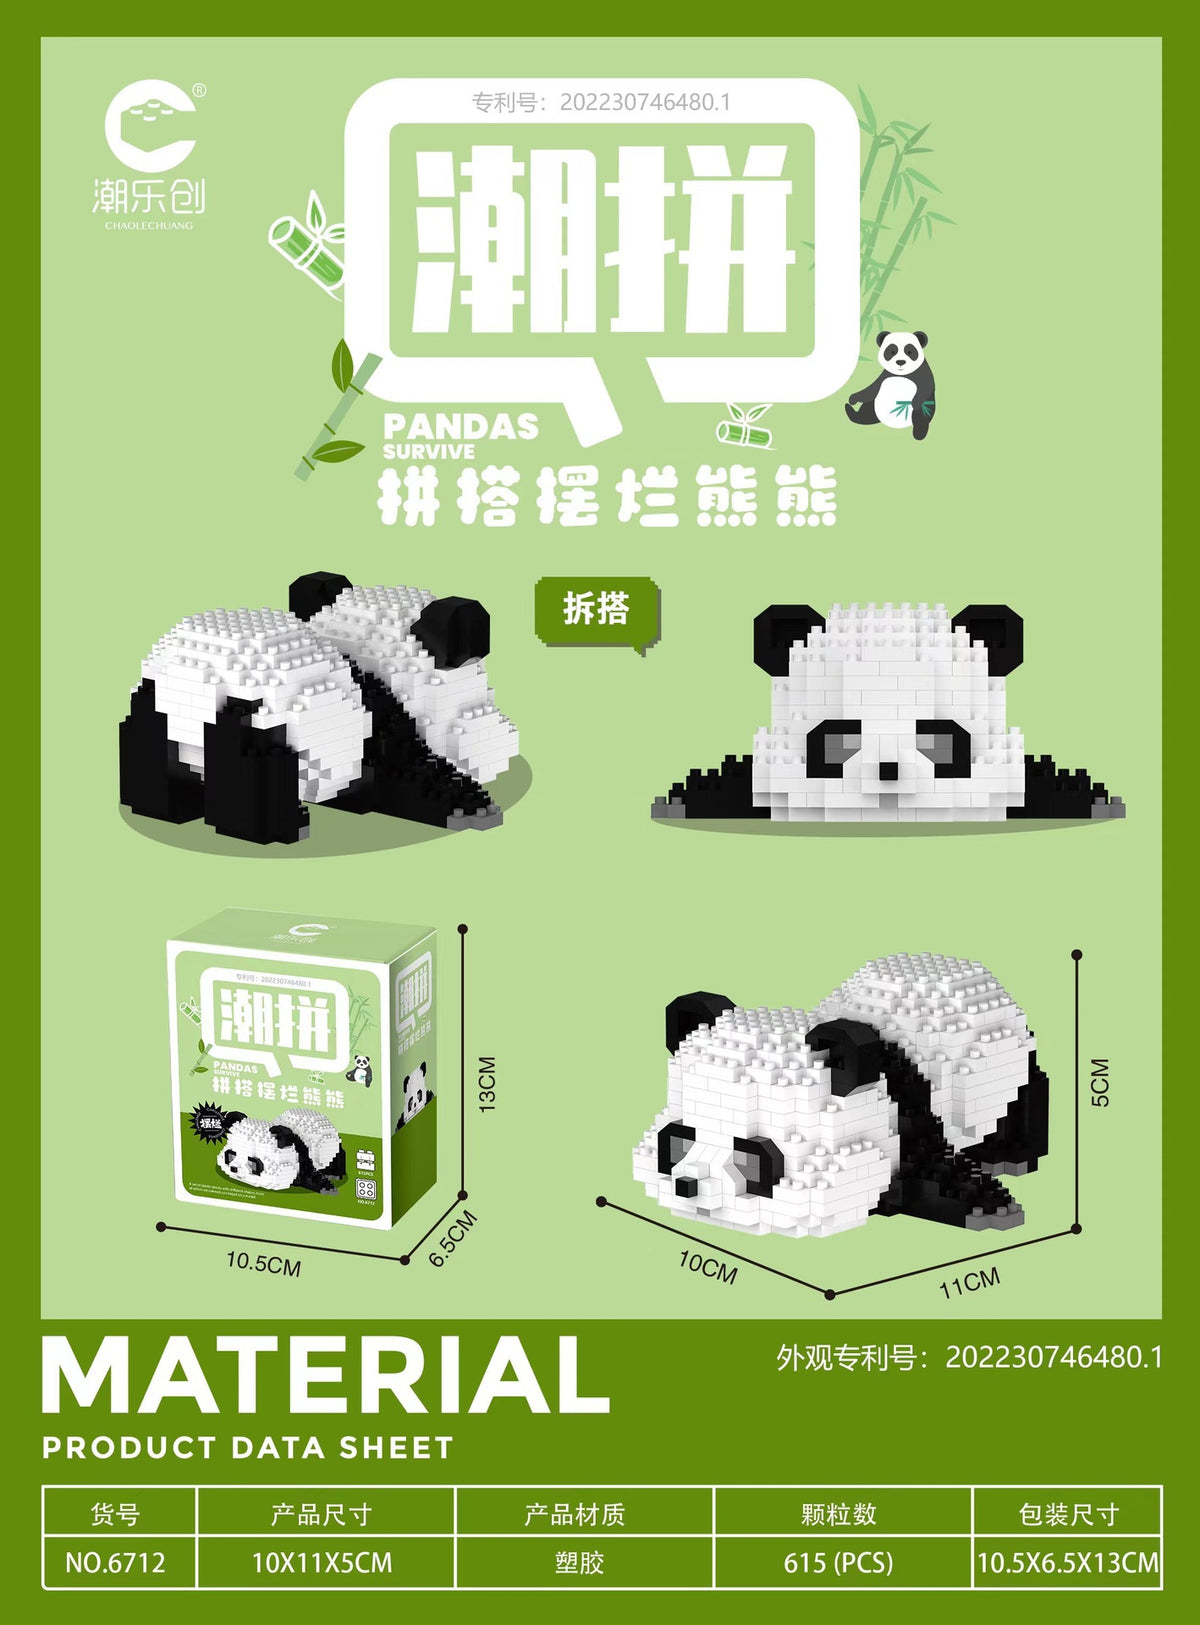 Chaolechuang 6712-6713 Micro-diamond particles puzzle DIY assembled building blocks flower panda ornaments gift